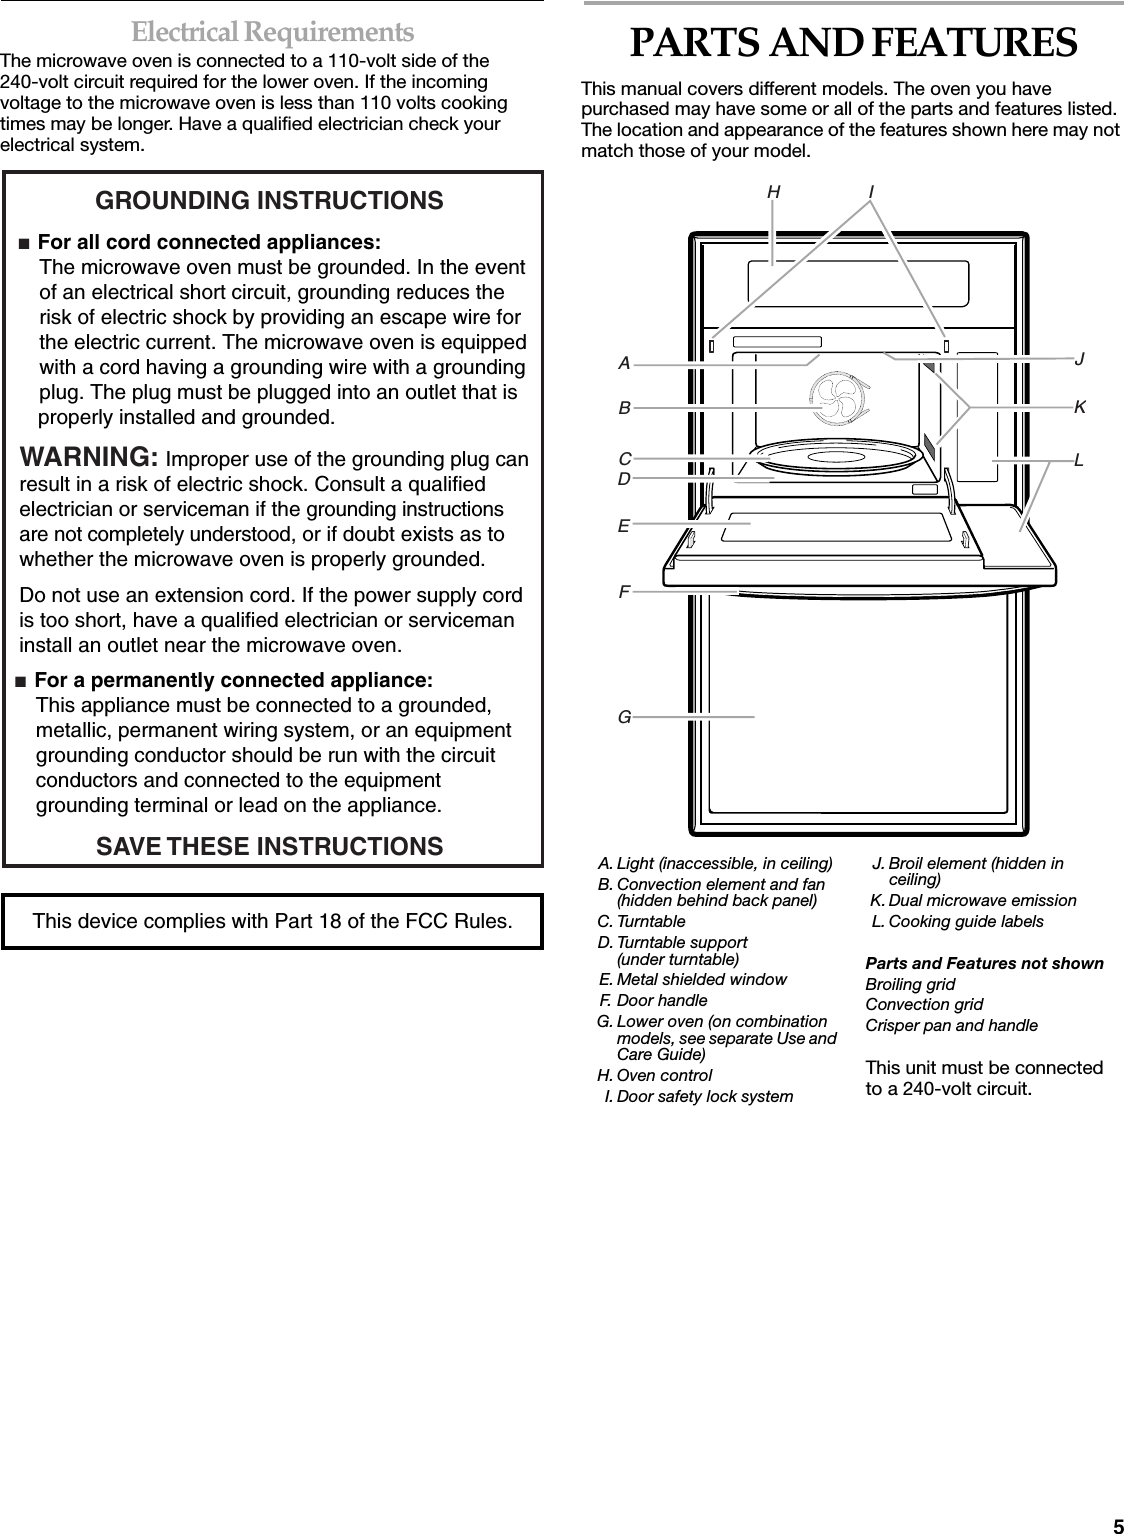 5Electrical RequirementsThe microwave oven is connected to a 110-volt side of the 240-volt circuit required for the lower oven. If the incoming voltage to the microwave oven is less than 110 volts cooking times may be longer. Have a qualified electrician check your electrical system.PARTS AND FEATURESThis manual covers different models. The oven you have purchased may have some or all of the parts and features listed. The location and appearance of the features shown here may not match those of your model.GROUNDING INSTRUCTIONS■  For all cord connected appliances: The microwave oven must be grounded. In the event  of an electrical short circuit, grounding reduces the  risk of electric shock by providing an escape wire for  the electric current. The microwave oven is equipped  with a cord having a grounding wire with a grounding  plug. The plug must be plugged into an outlet that is properly installed and grounded.WARNING: Improper use of the grounding plug can result in a risk of electric shock. Consult a qualified electrician or serviceman if the grounding instructions are not completely understood, or if doubt exists as to whether the microwave oven is properly grounded. ■  For a permanently connected appliance: This appliance must be connected to a grounded,  metallic, permanent wiring system, or an equipment  grounding conductor should be run with the circuit  conductors and connected to the equipment  grounding terminal or lead on the appliance.Do not use an extension cord. If the power supply cord is too short, have a qualified electrician or serviceman install an outlet near the microwave oven.SAVE THESE INSTRUCTIONSThis device complies with Part 18 of the FCC Rules.A. Light (inaccessible, in ceiling)B. Convection element and fan (hidden behind back panel)C. TurntableD. Turntable support(under turntable)E. Metal shielded windowF. Door handleG. Lower oven (on combination models, see separate Use and Care Guide)H. Oven controlI. Door safety lock systemJ. Broil element (hidden in ceiling)K. Dual microwave emissionL. Cooking guide labelsParts and Features not shownBroiling gridConvection gridCrisper pan and handleThis unit must be connected to a 240-volt circuit.H                  IABCDEFGJKL